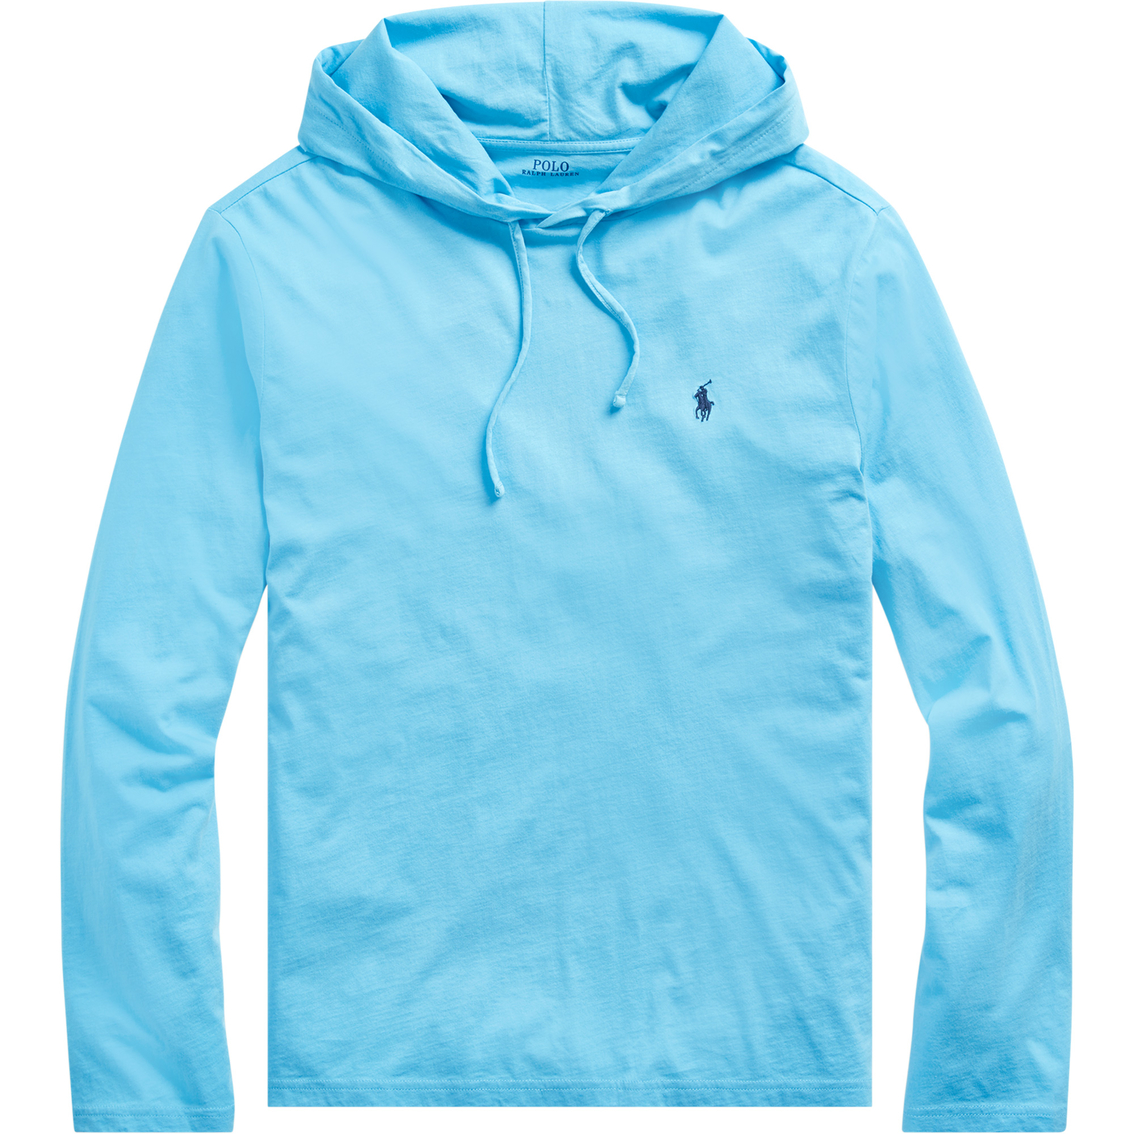 Polo Ralph Lauren Cotton Jersey Hooded Tee - Image 4 of 4